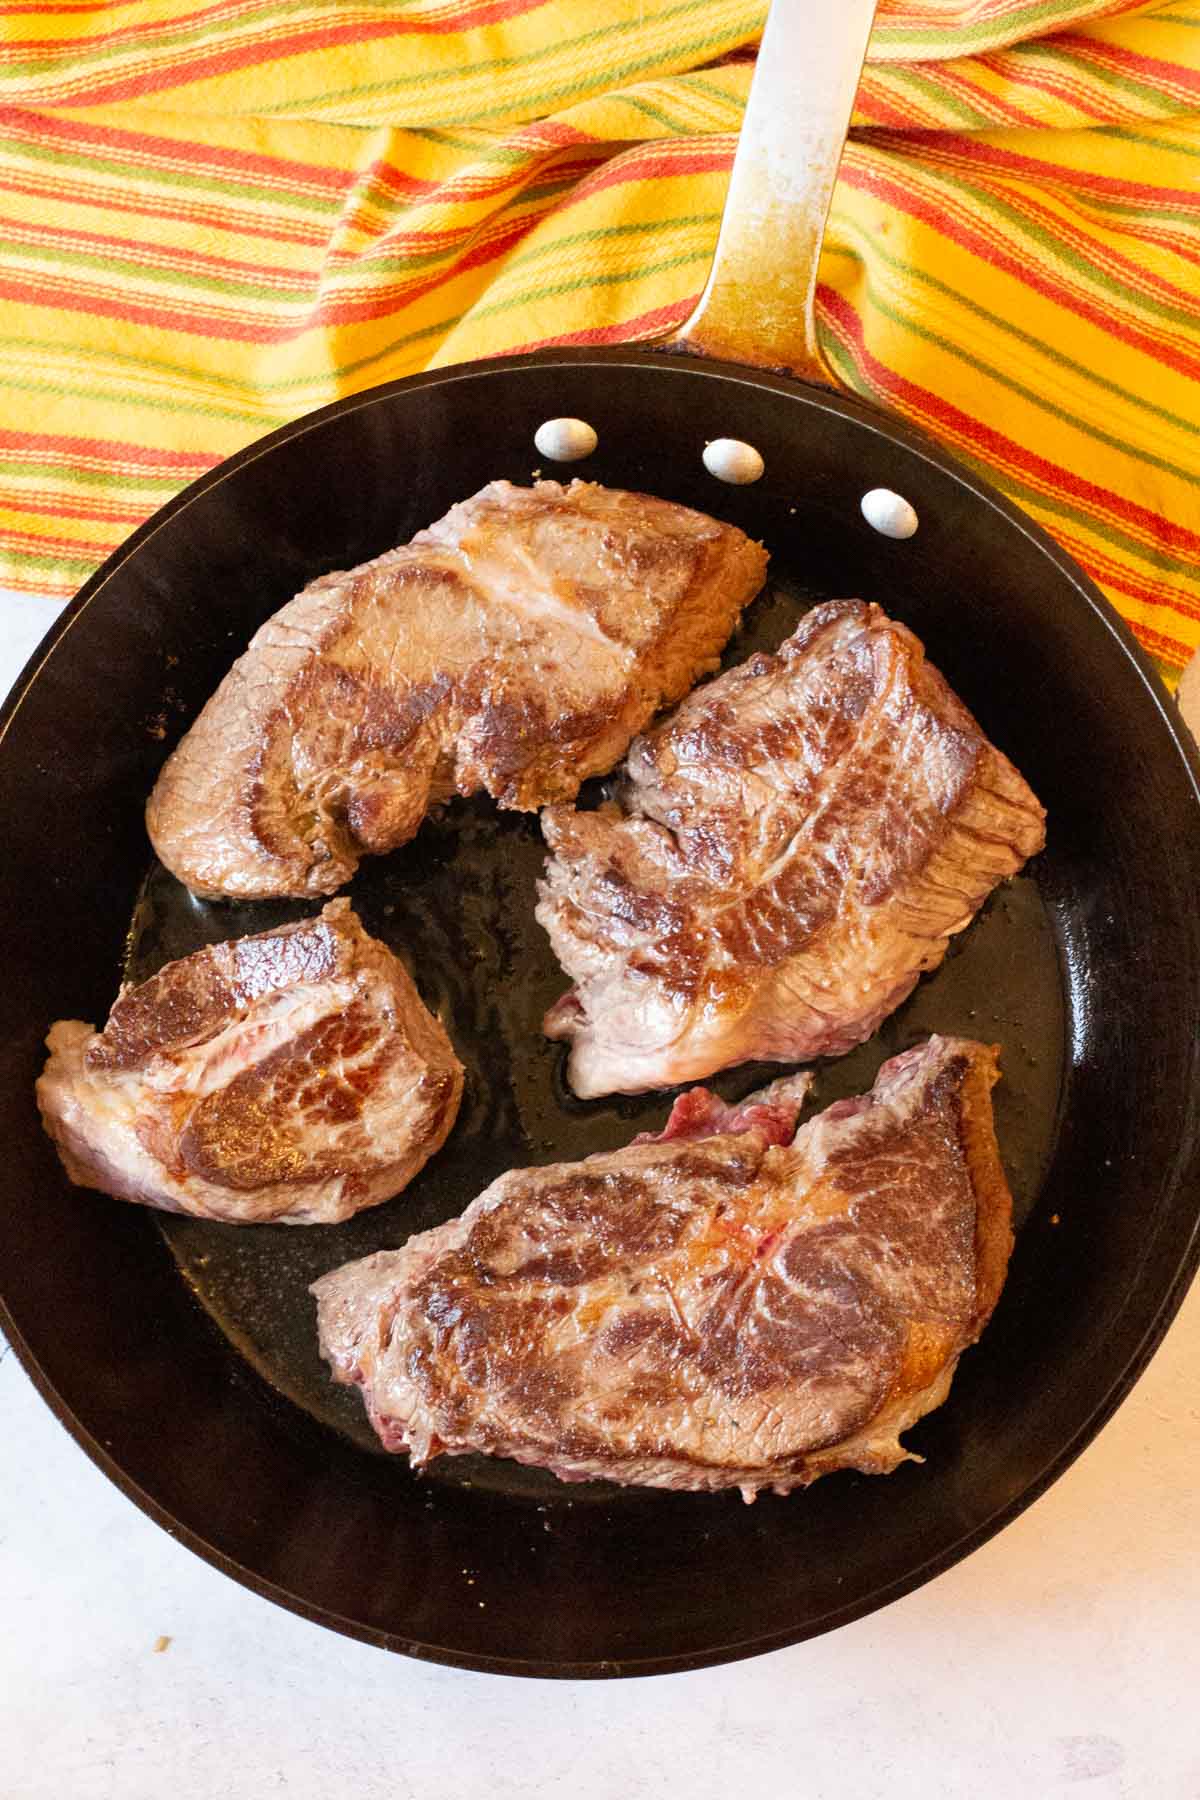 Browning chuck roast for slow cooker beef barbacoa.